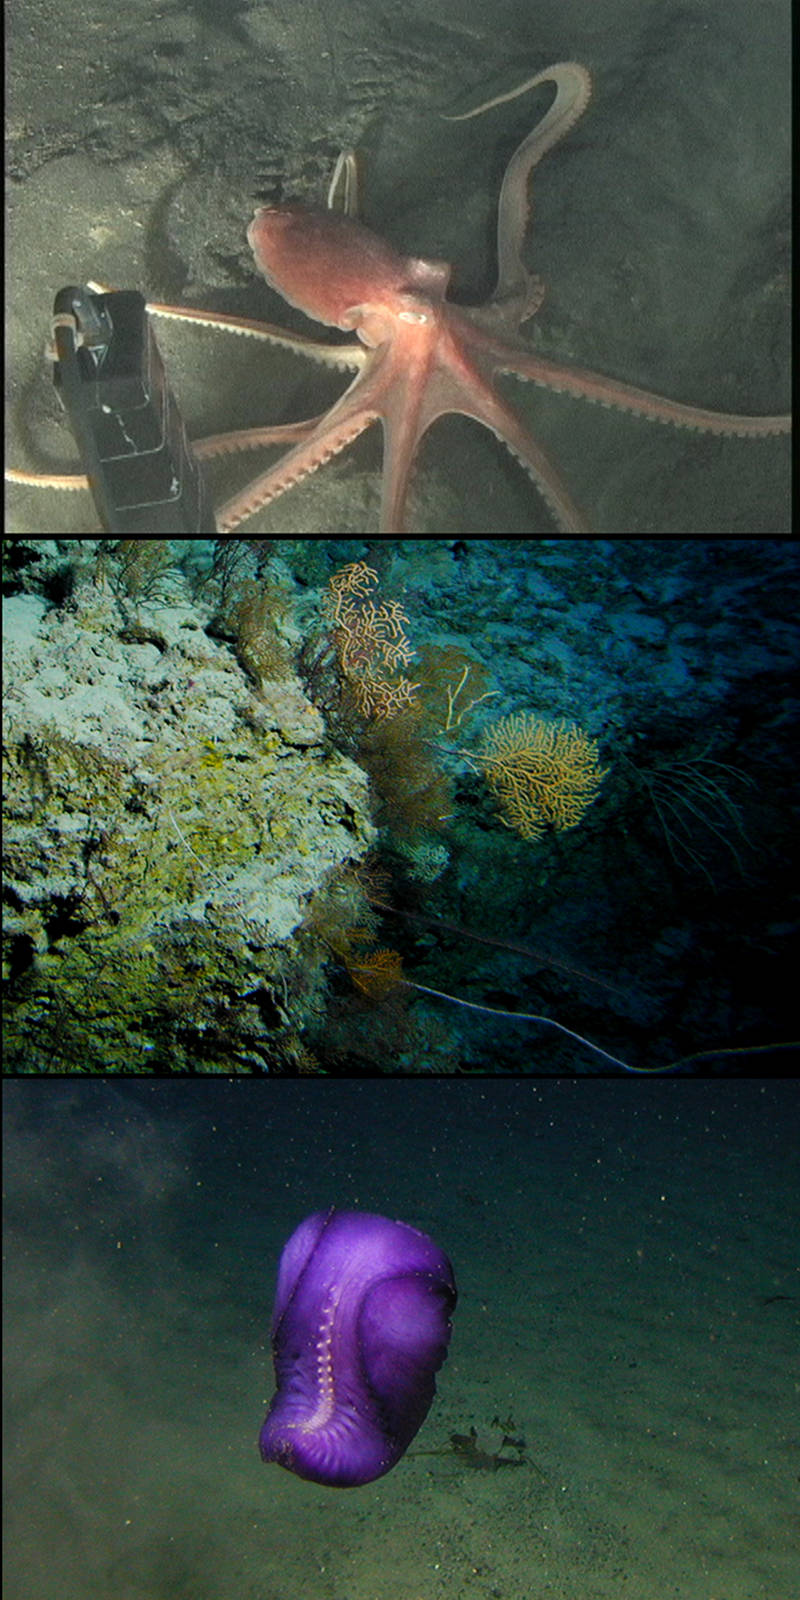 Some of the fauna observed in American Samoa during dives with the Pisces V Deep Diving Manned Submersible during 2005.